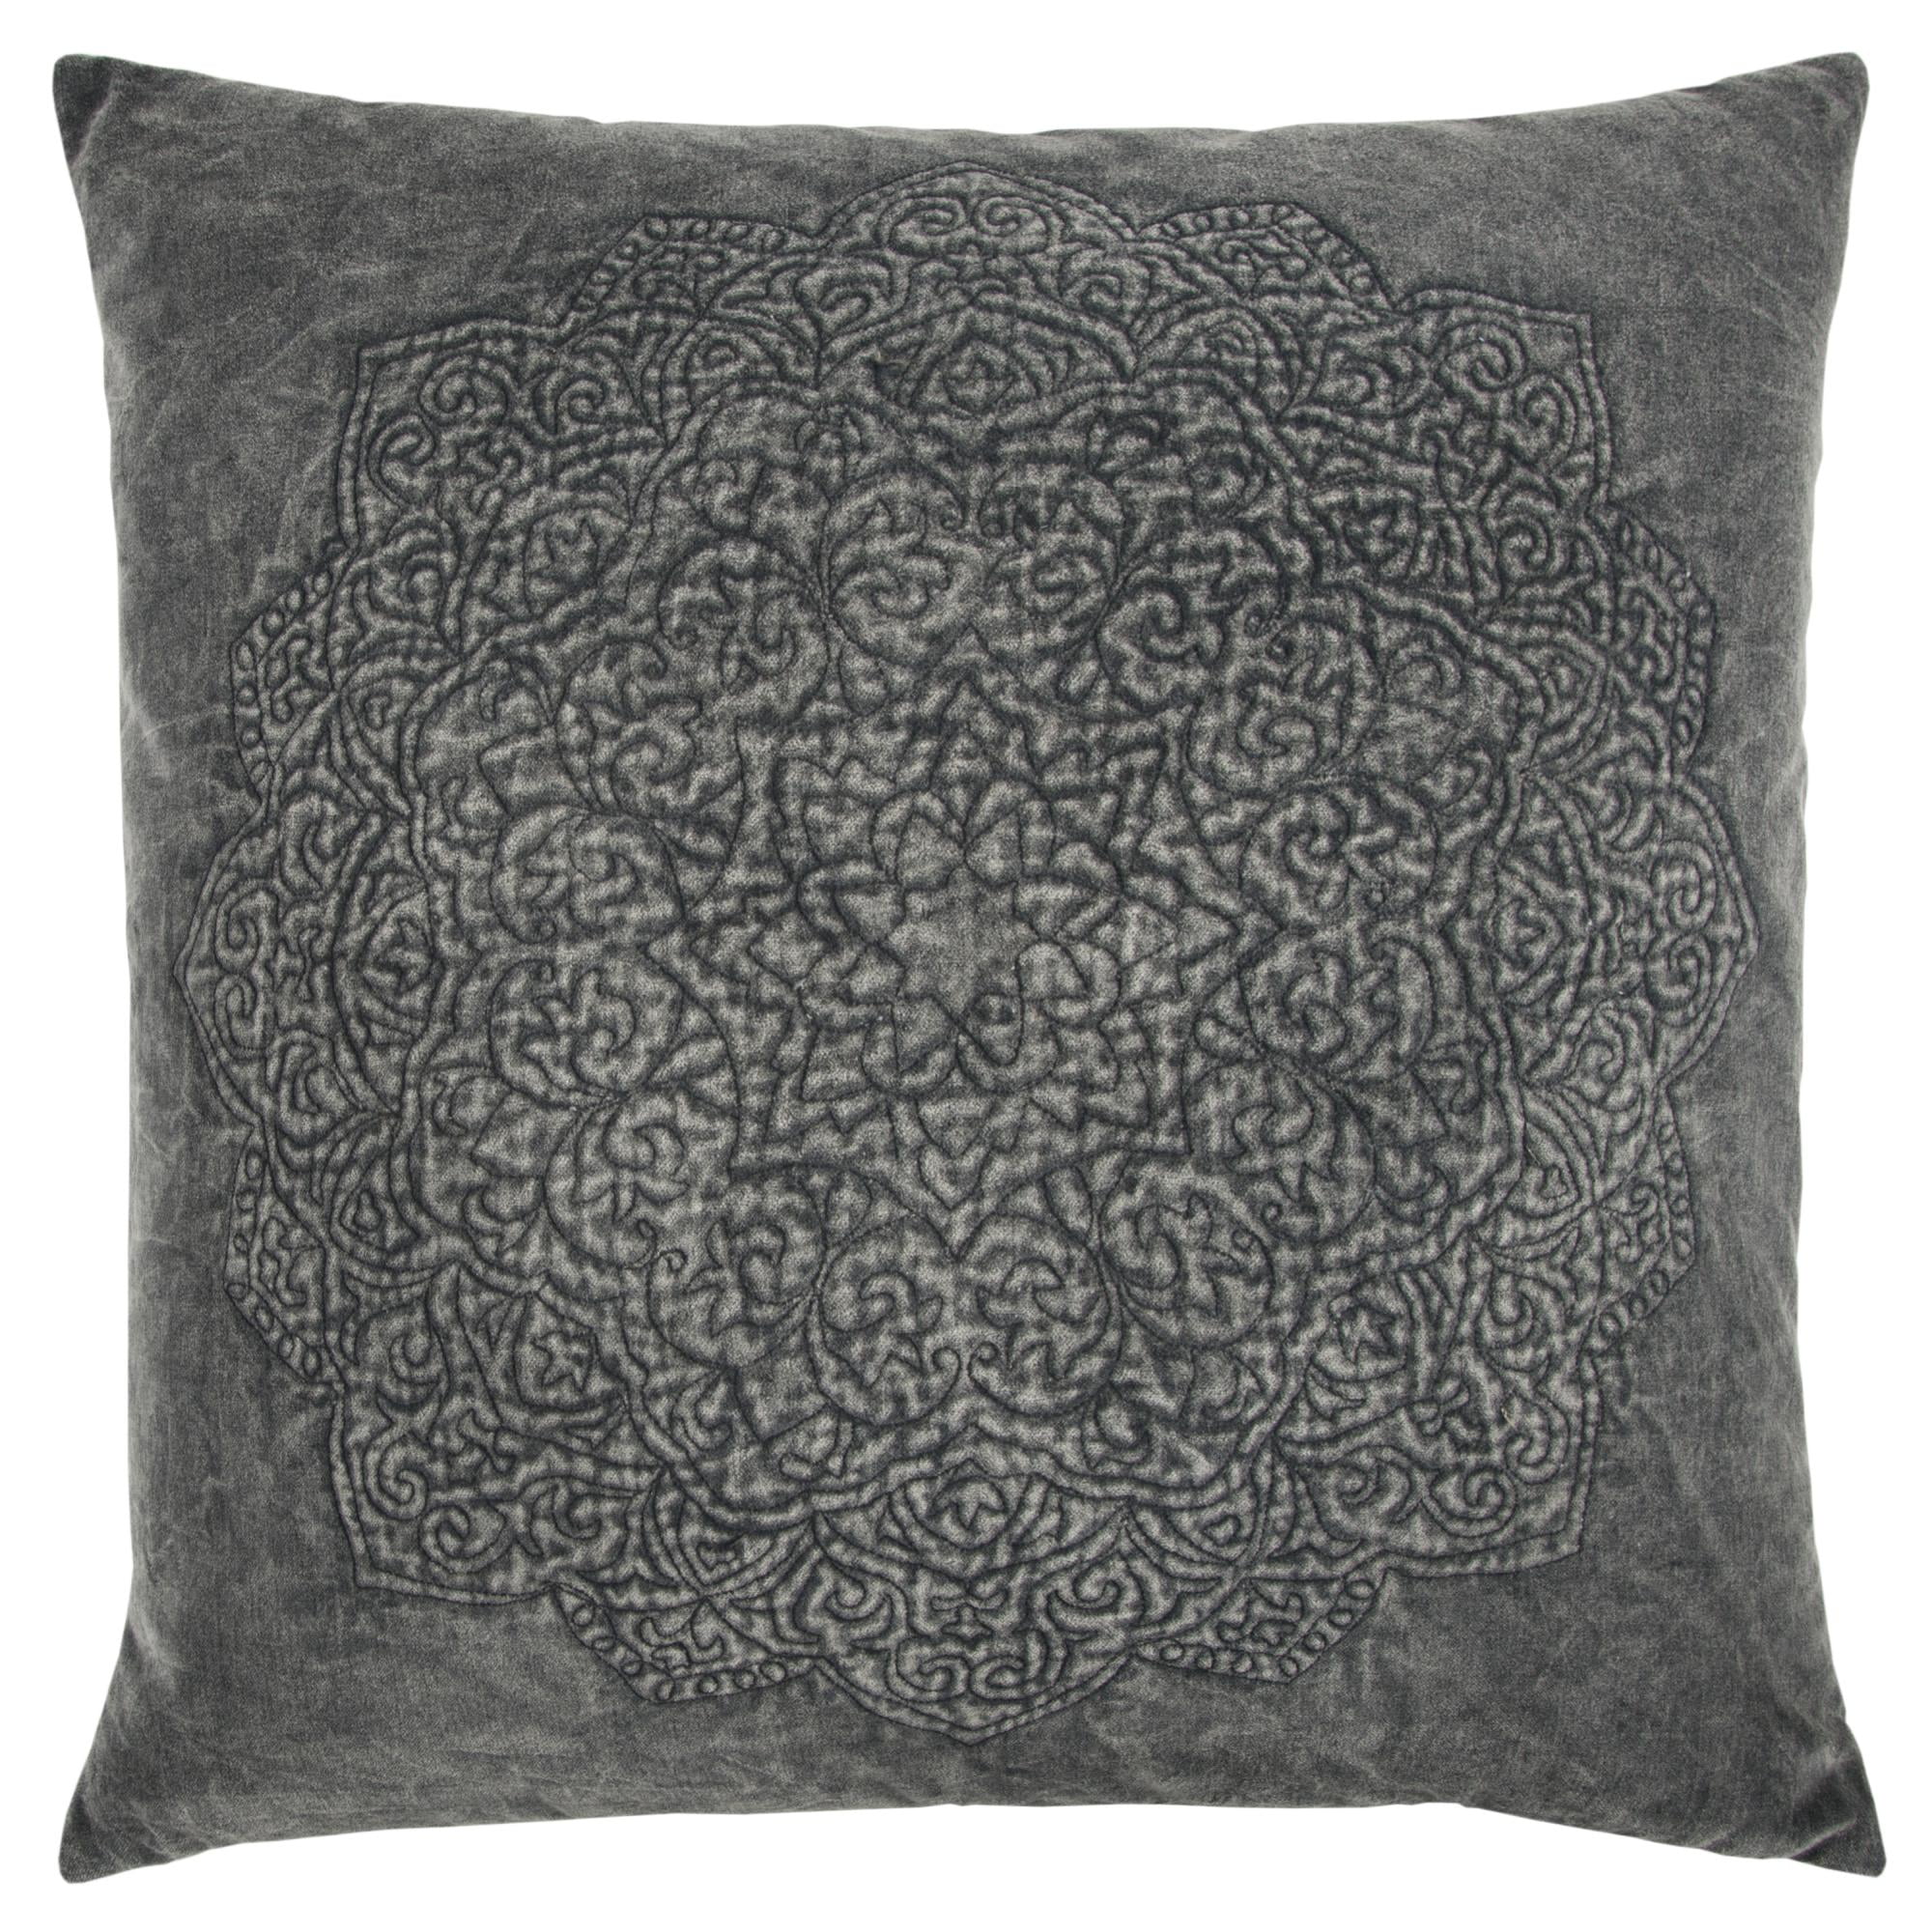 Orange Rizzy Home T06256 Printed with Applique and Slight Embroidery with Cording Details Decorative Pillow 18 by 18-Inch